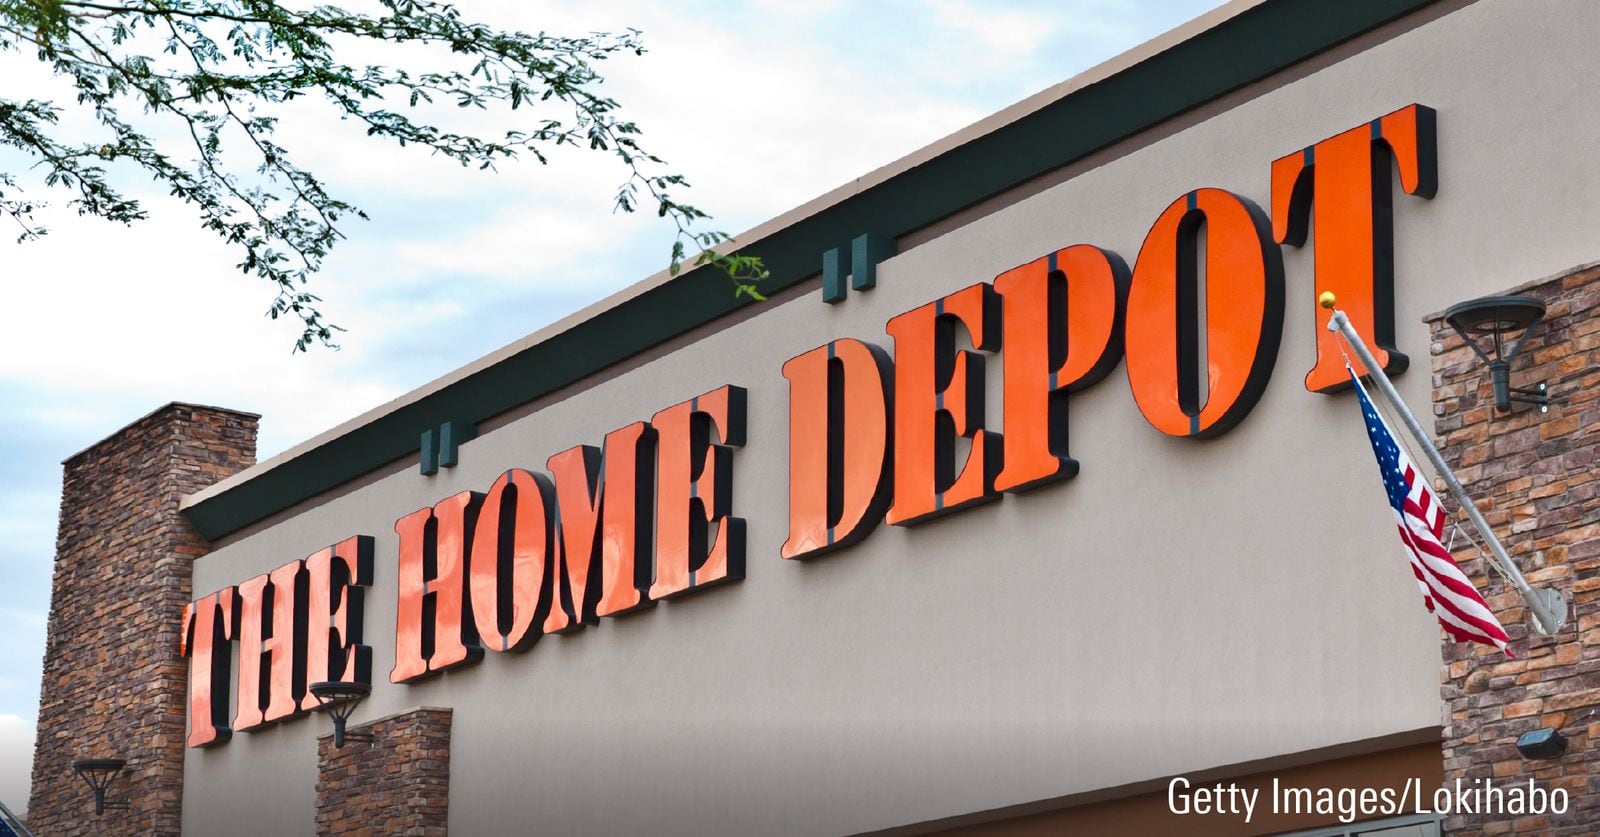 The Home Depot retail store.